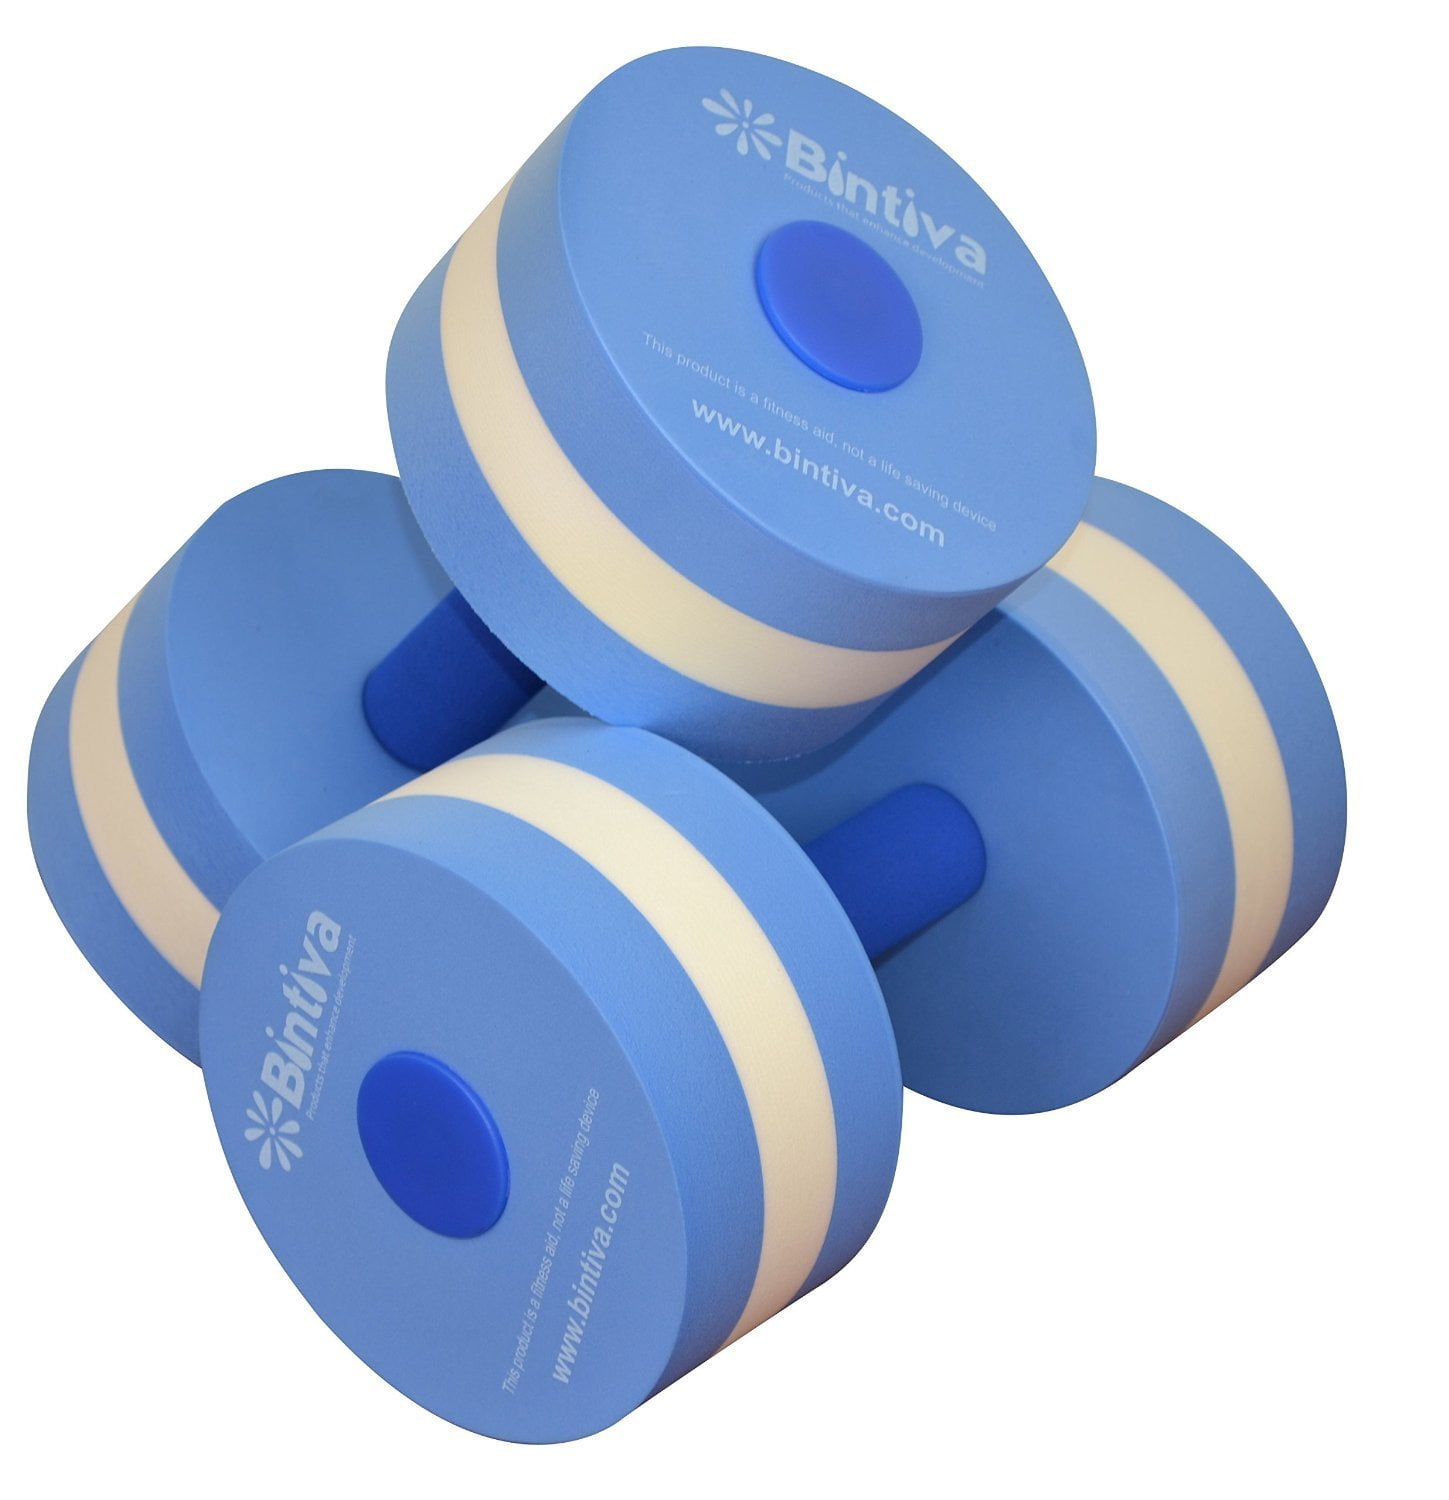 Exercise Water Aquatic Aerobics Fitness Dumbbell 2pcs Blue Barbell Set of 2 for sale online 